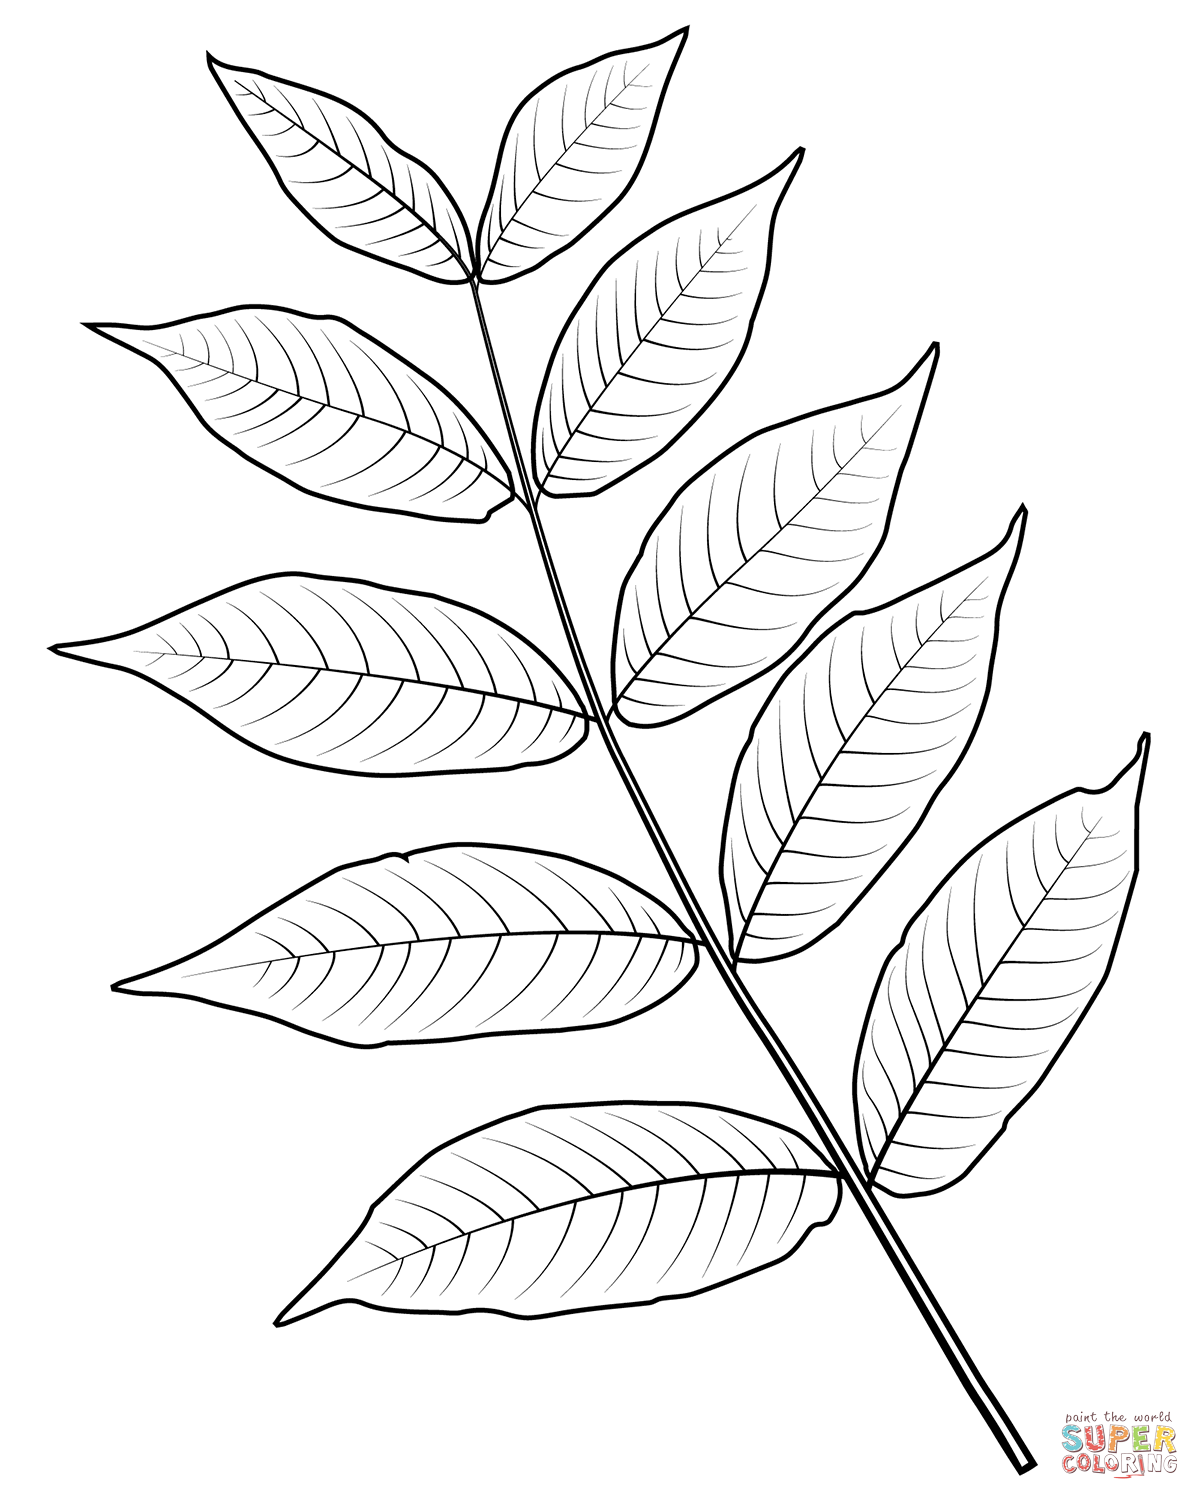 Black Walnut Leaf coloring page | Free Printable Coloring Pages